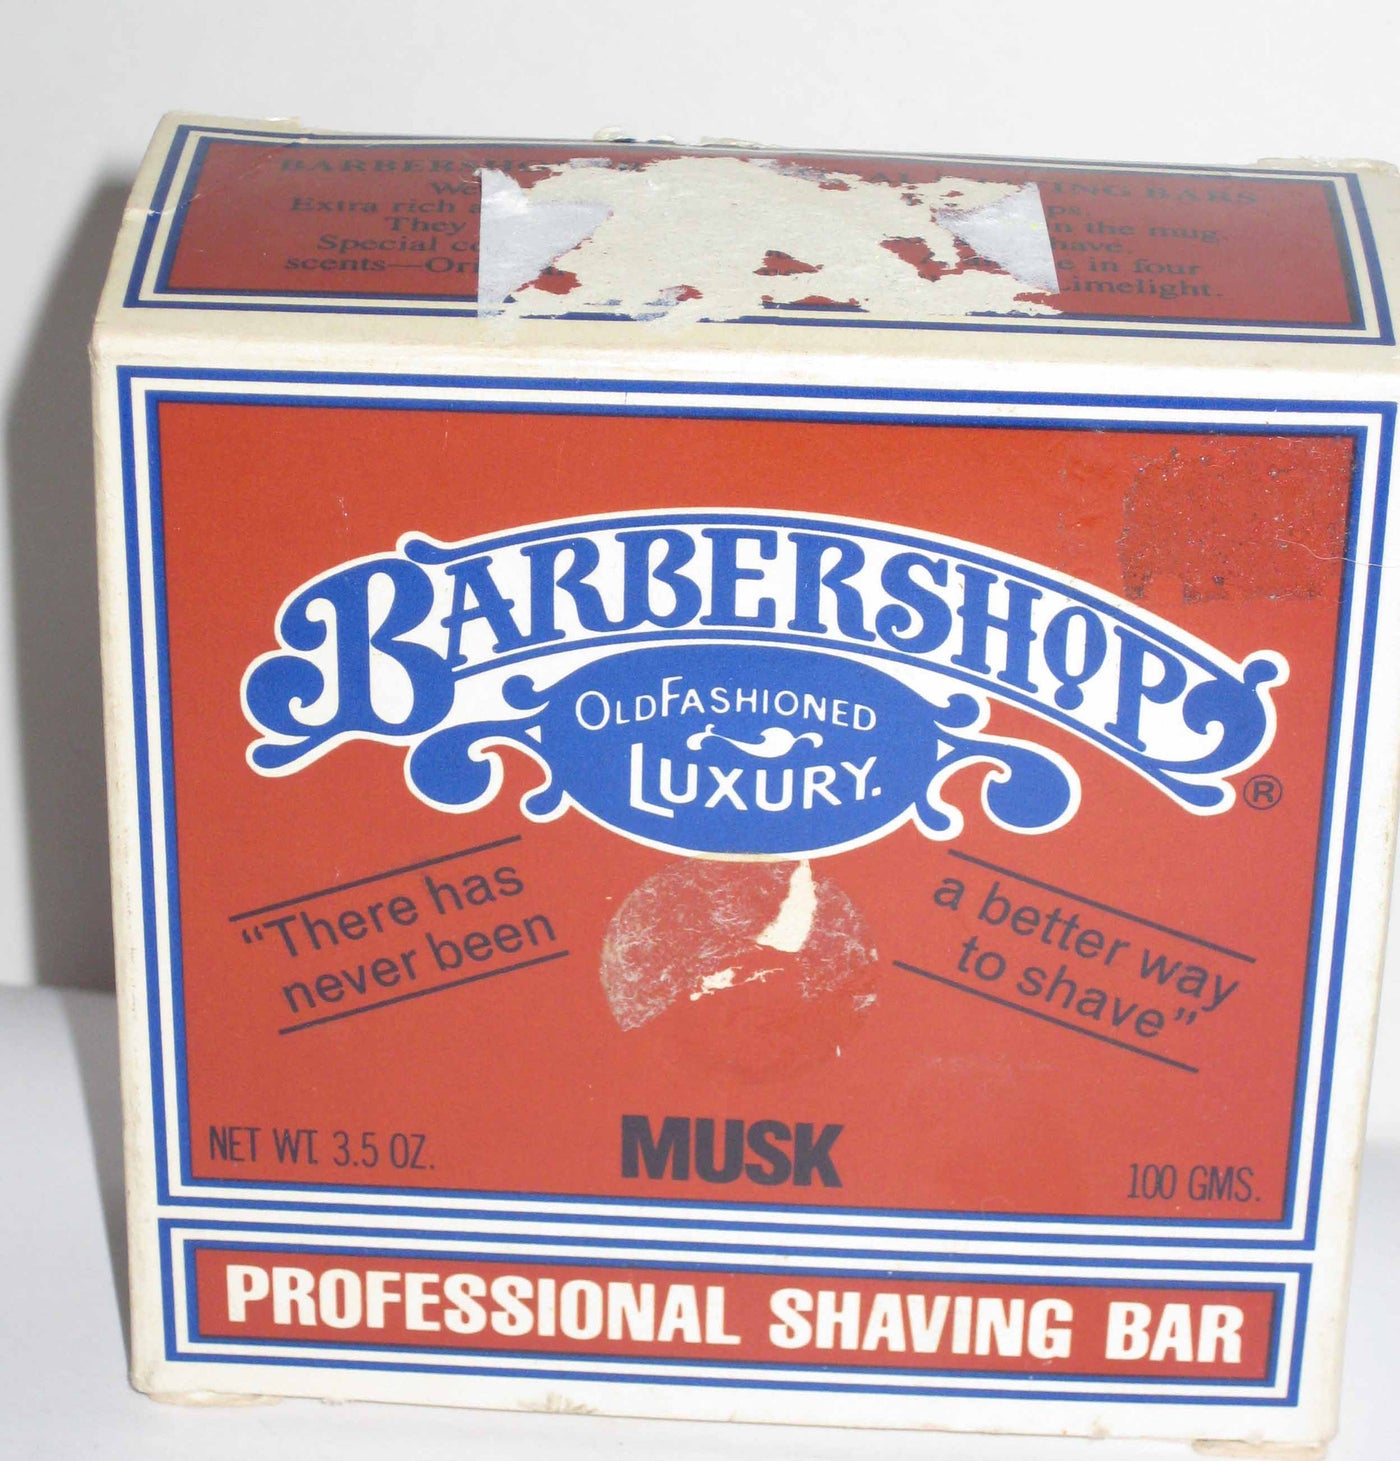 Barbershop Old Fashioned Luxury Musk Professional Soap